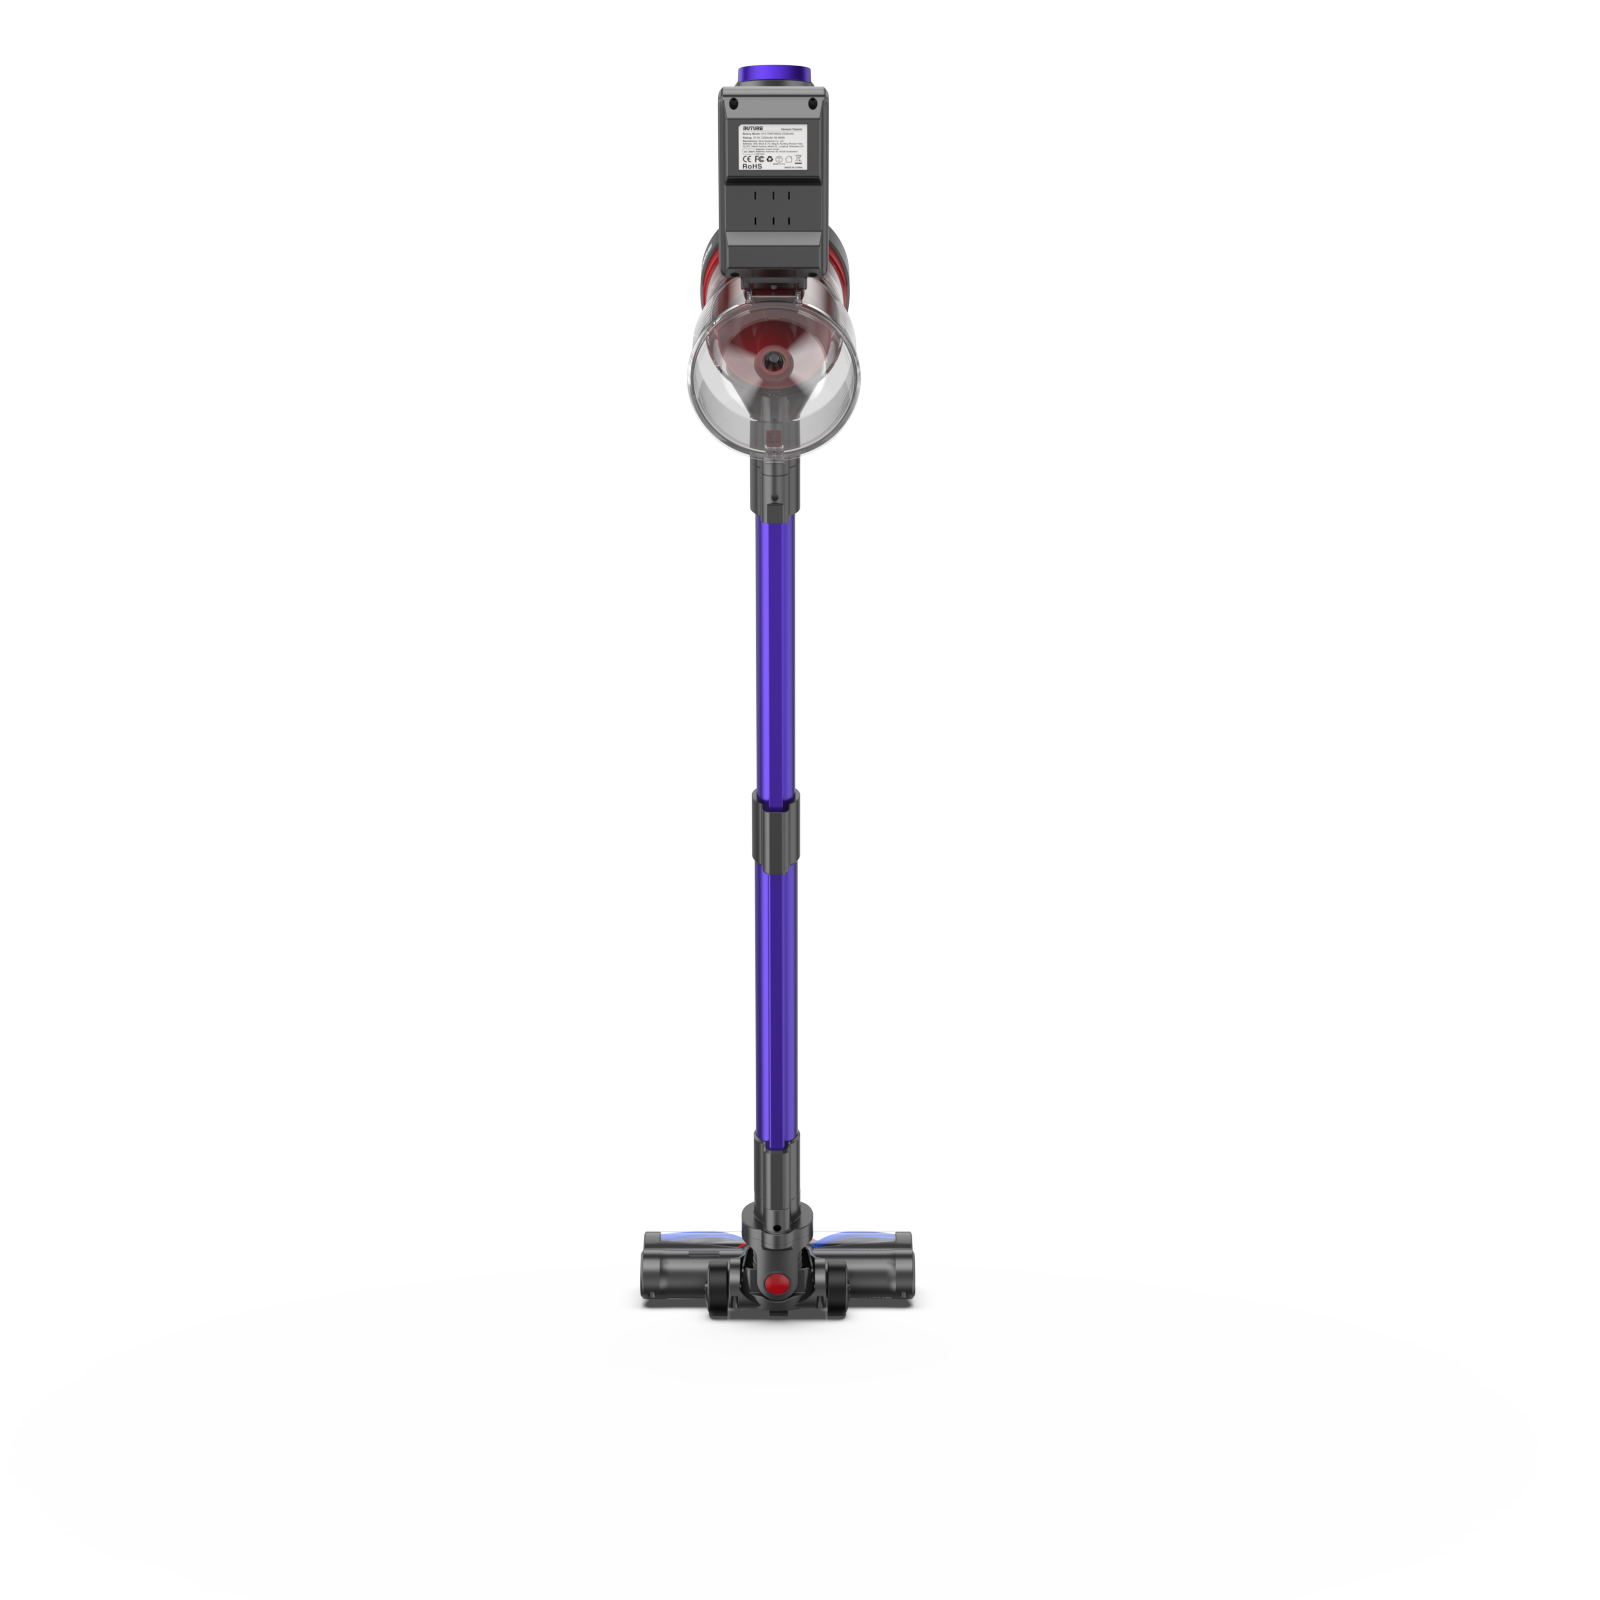  BuTure Cordless Vacuum Cleaner, 38Kpa Stick Vacuum with  Charging Dock Brushless Motor 450W, Vacuum Cleaner for Home Automatically  Adjust Suction, Wireless Vacuum for Pet Hair/Carpet/Hard Floor : Todo lo  demás